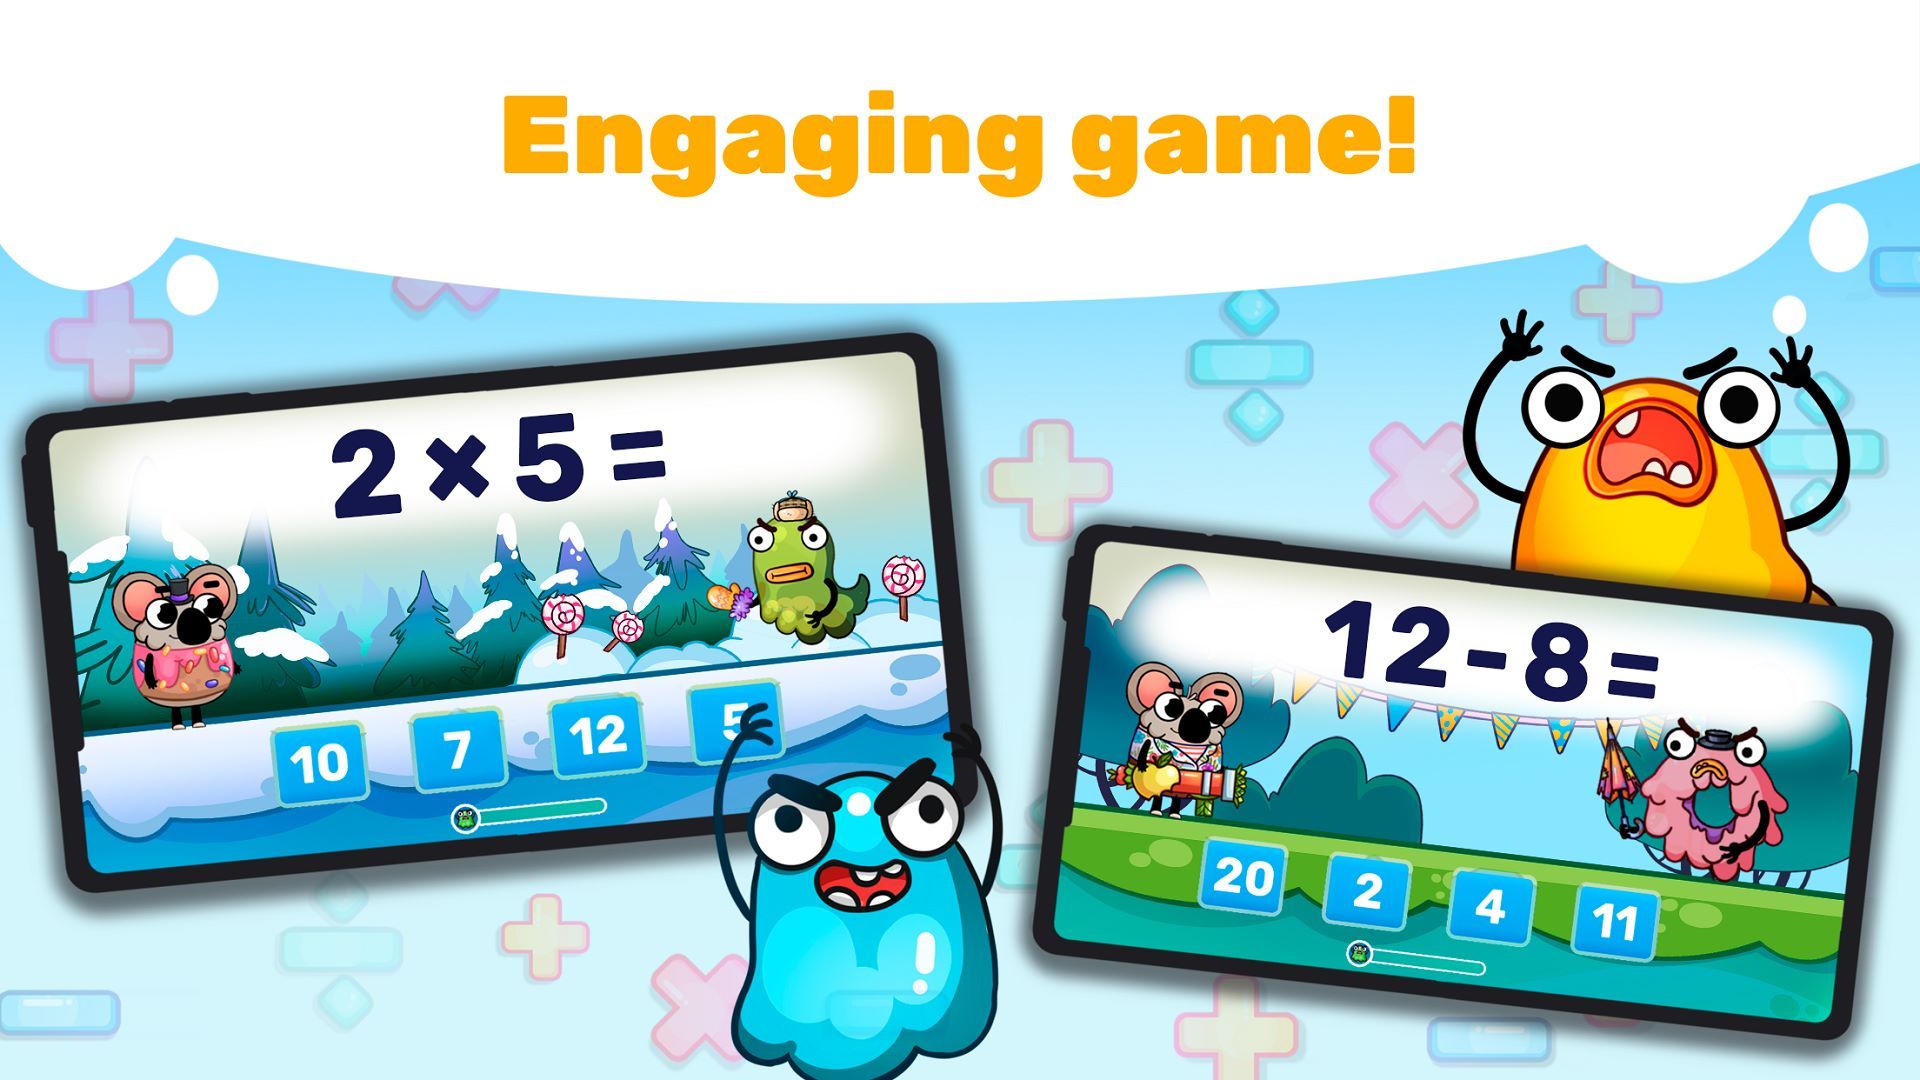 Fun Math: master math facts in cool game! (Addition, subtraction, multiplication and division for kids)